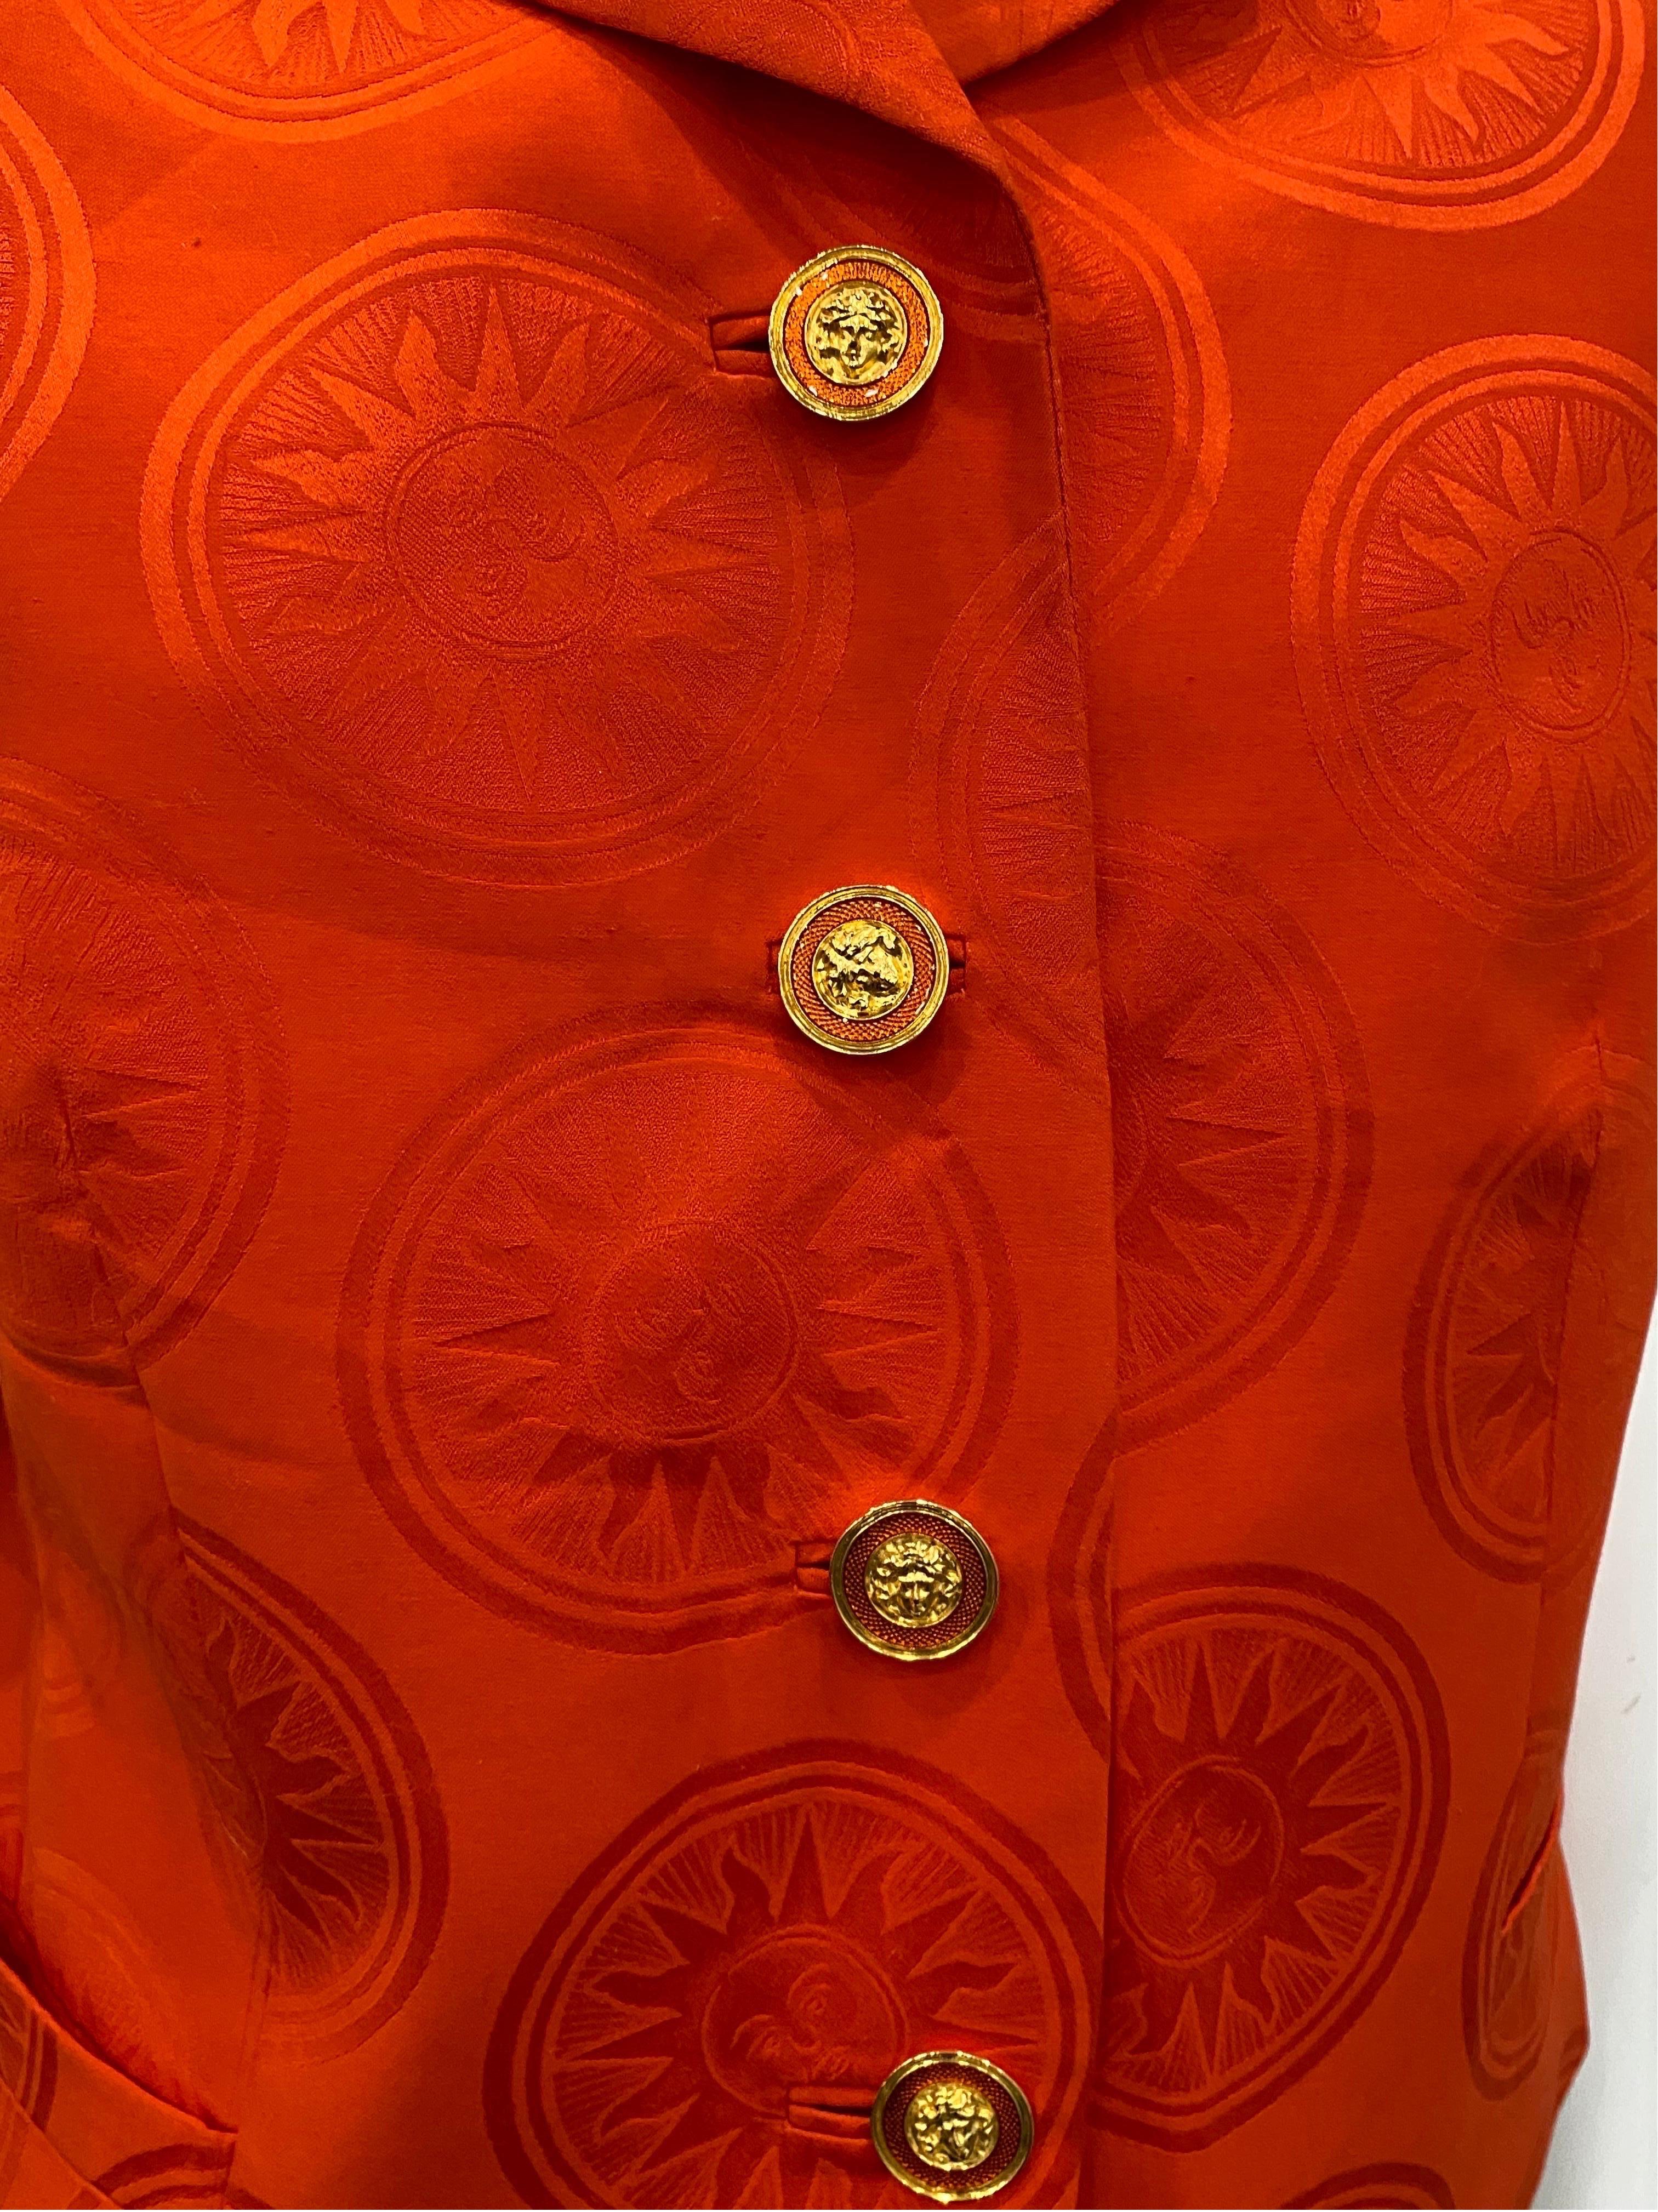 Red Gianni Versace Couture Vintage Orange Silk Short Sleeve Jacket/Top - Size 6 For Sale